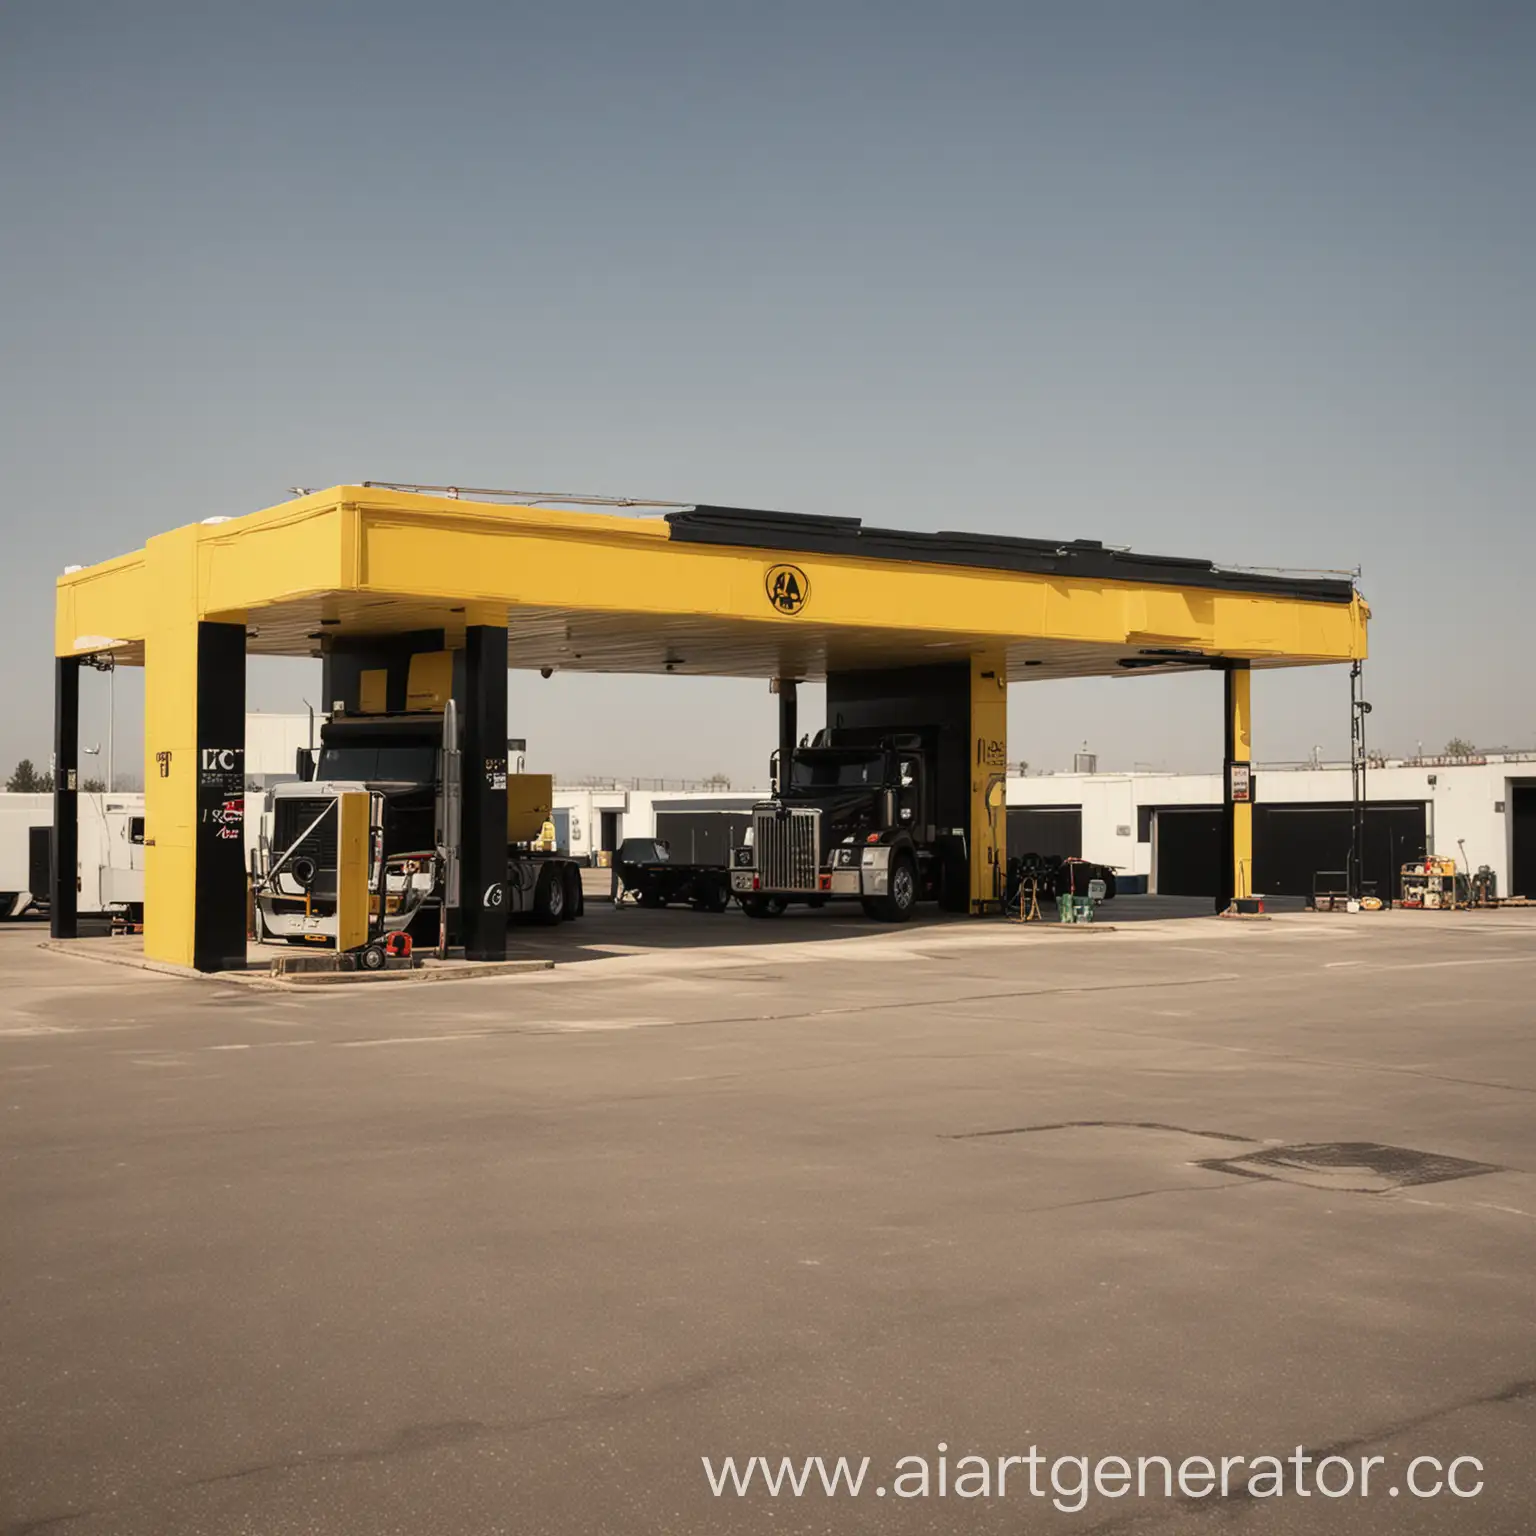 Yellow-and-Black-Truck-Service-Station